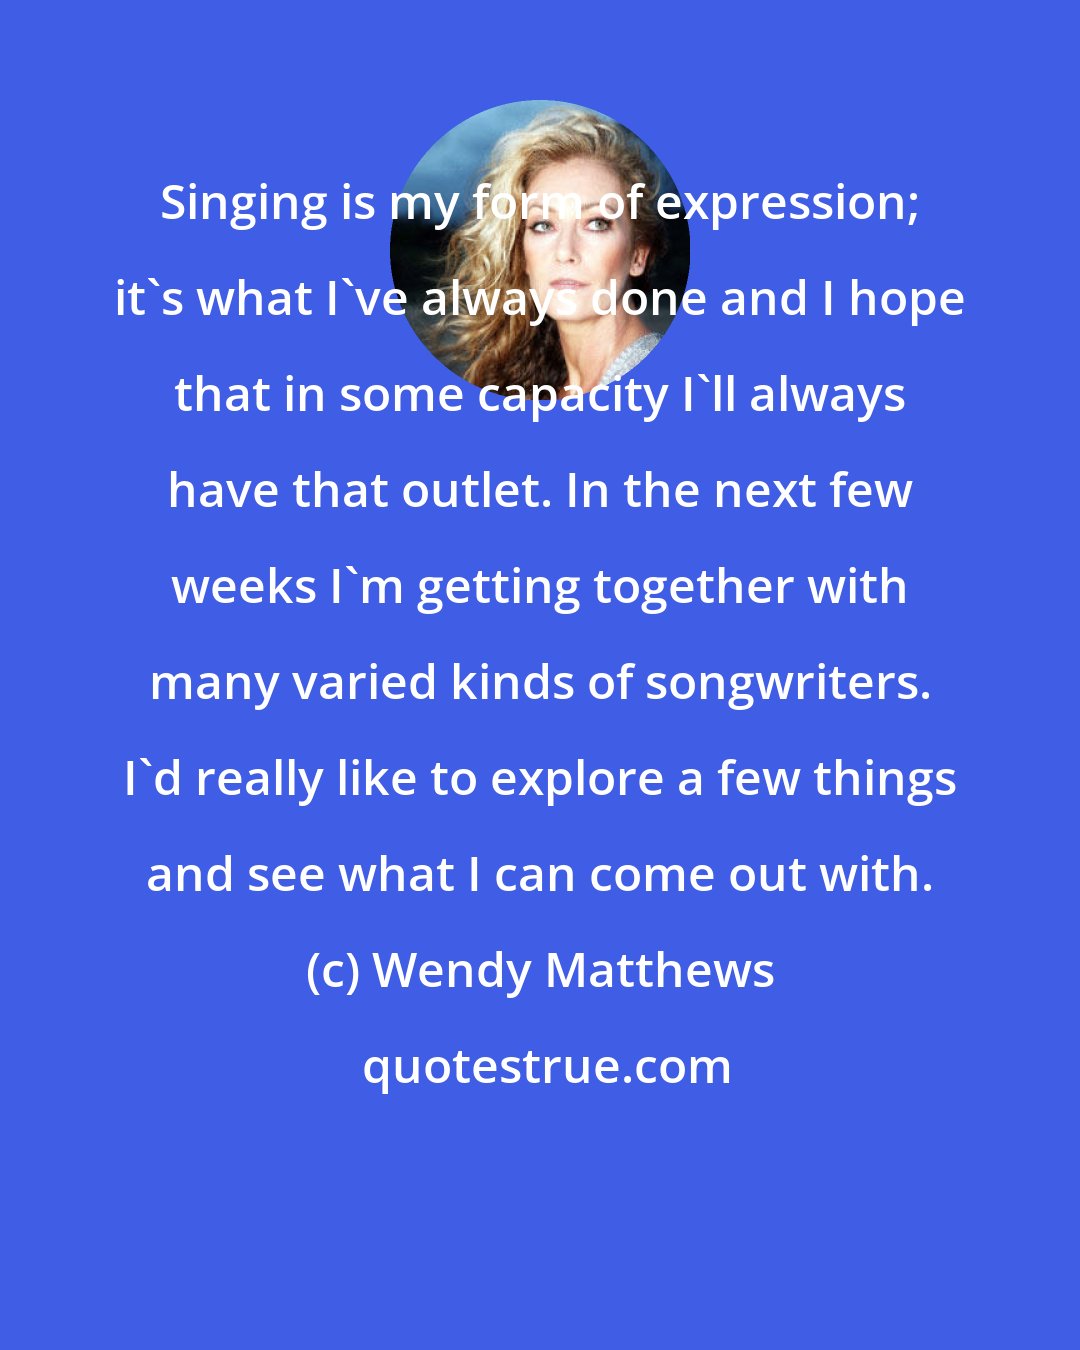 Wendy Matthews: Singing is my form of expression; it's what I've always done and I hope that in some capacity I'll always have that outlet. In the next few weeks I'm getting together with many varied kinds of songwriters. I'd really like to explore a few things and see what I can come out with.